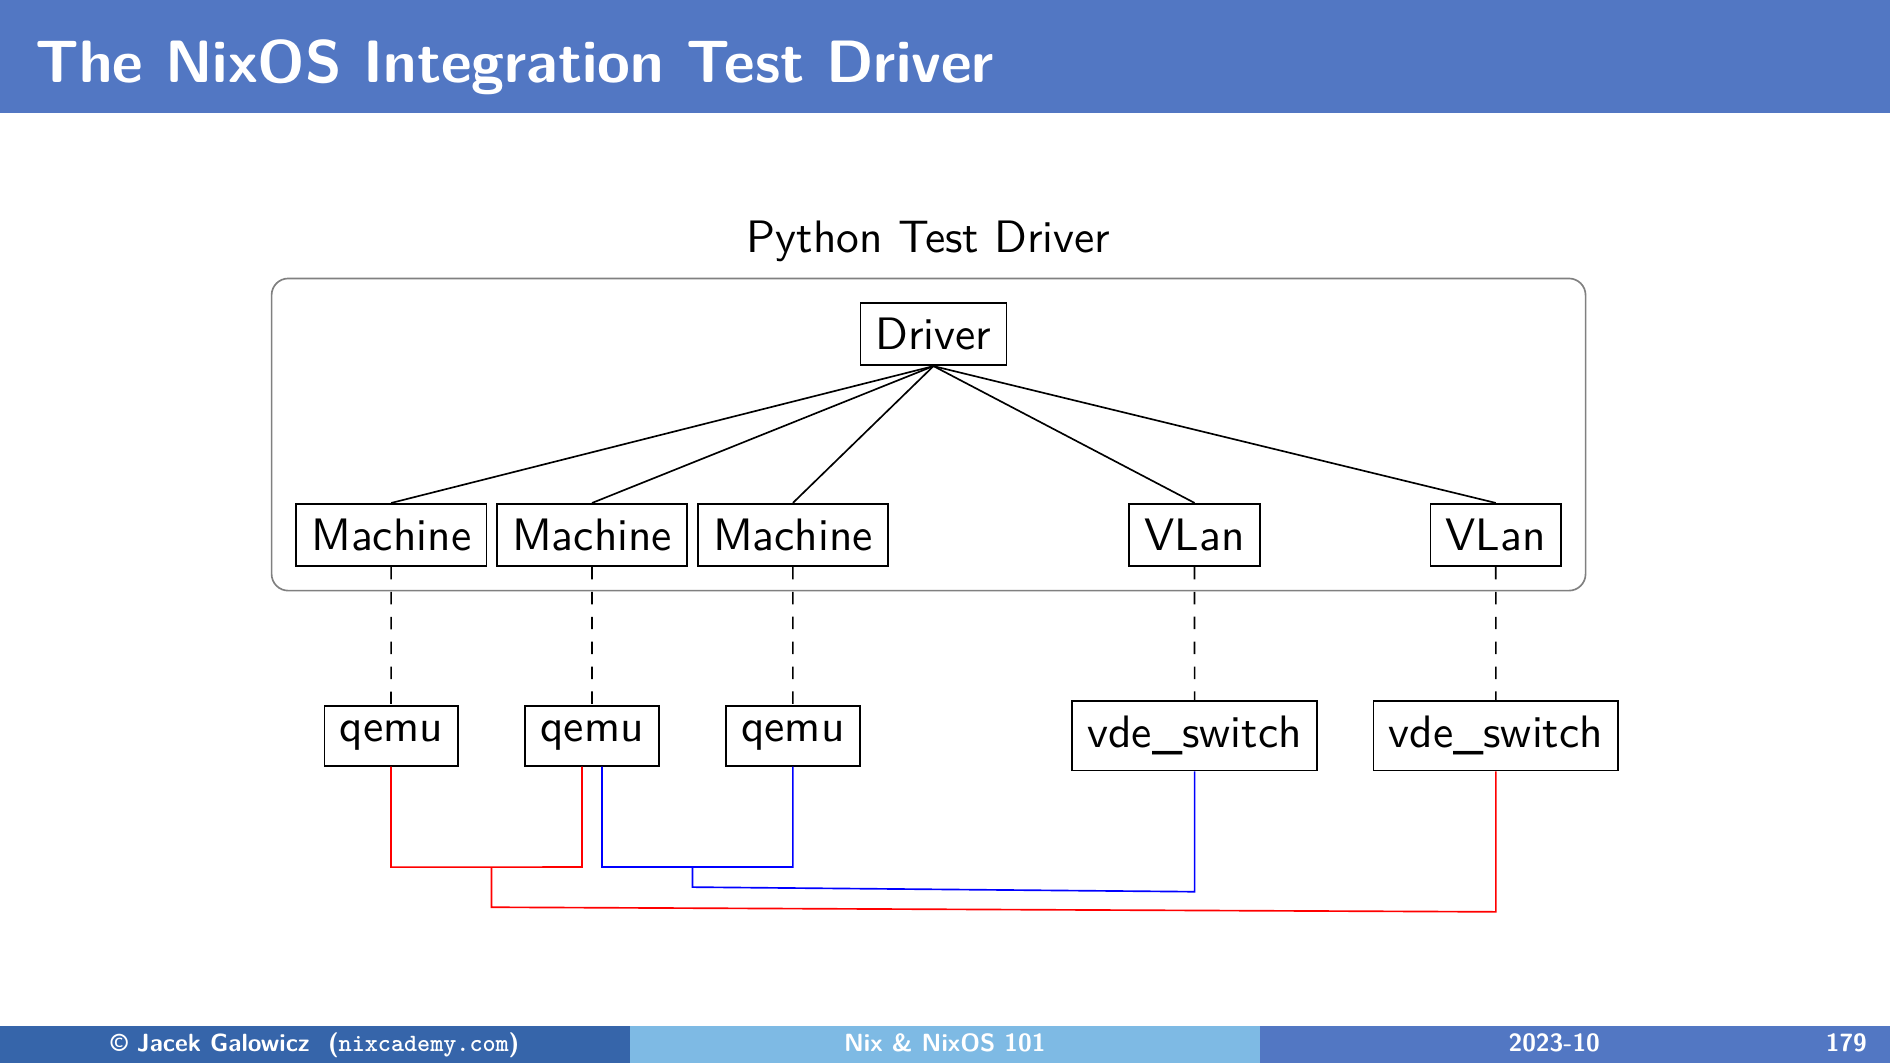 The Big Picture Architecture of the NixOS Integration Test Driver